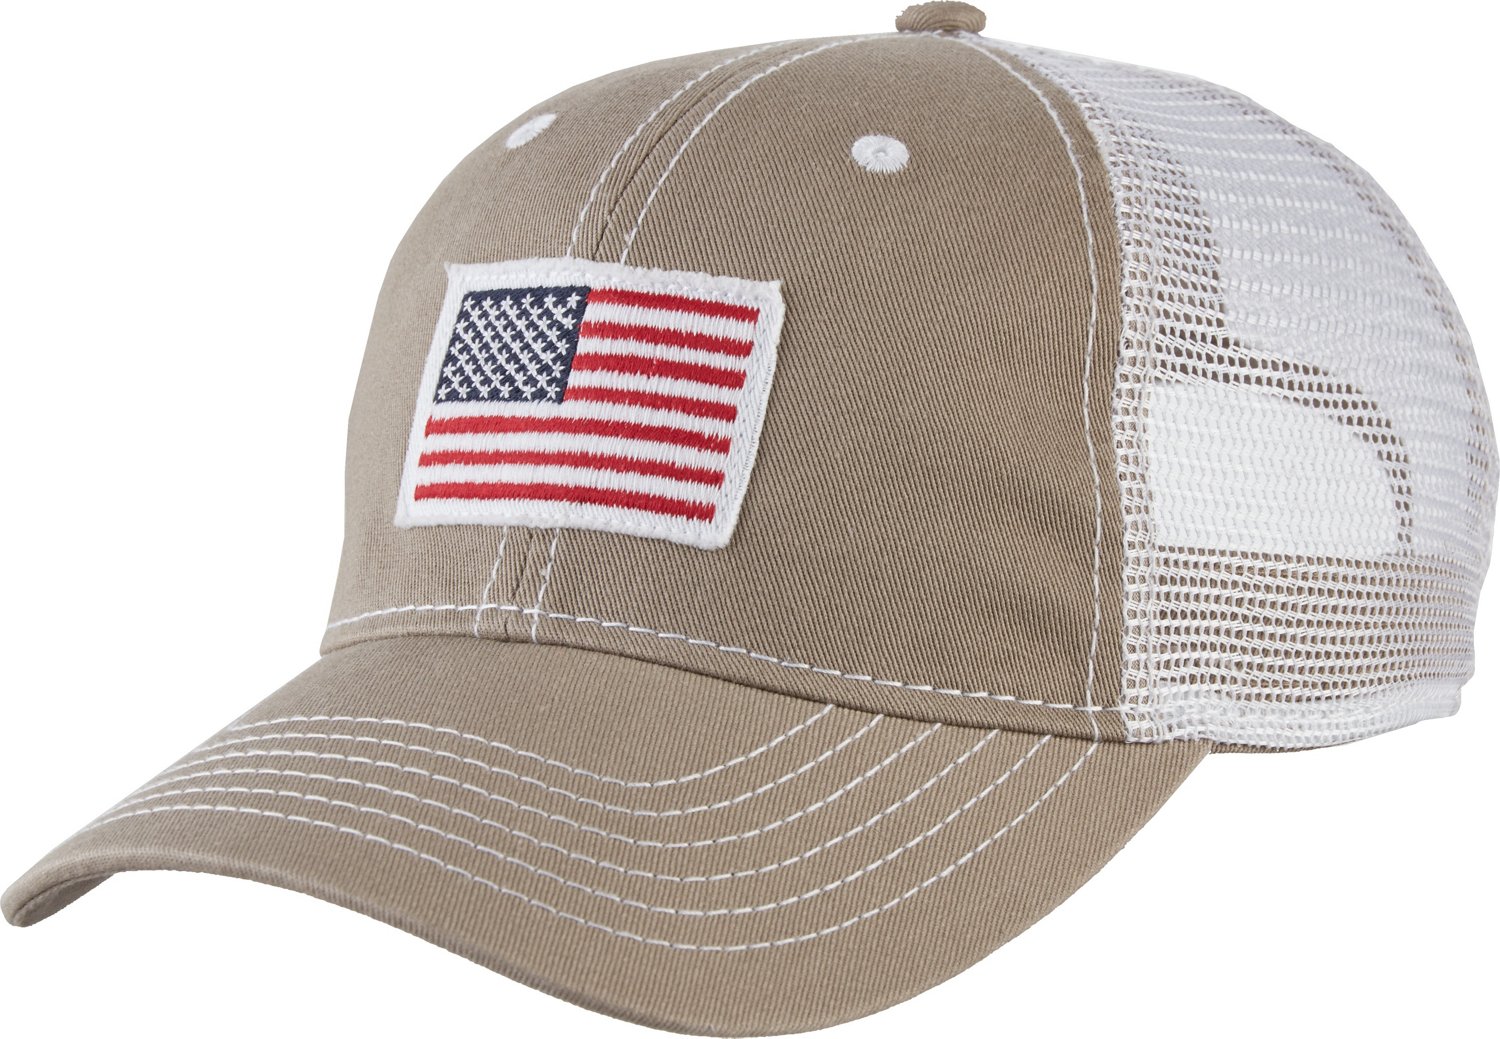 Academy Sports + Outdoors Mens American Flag Trucker Hat